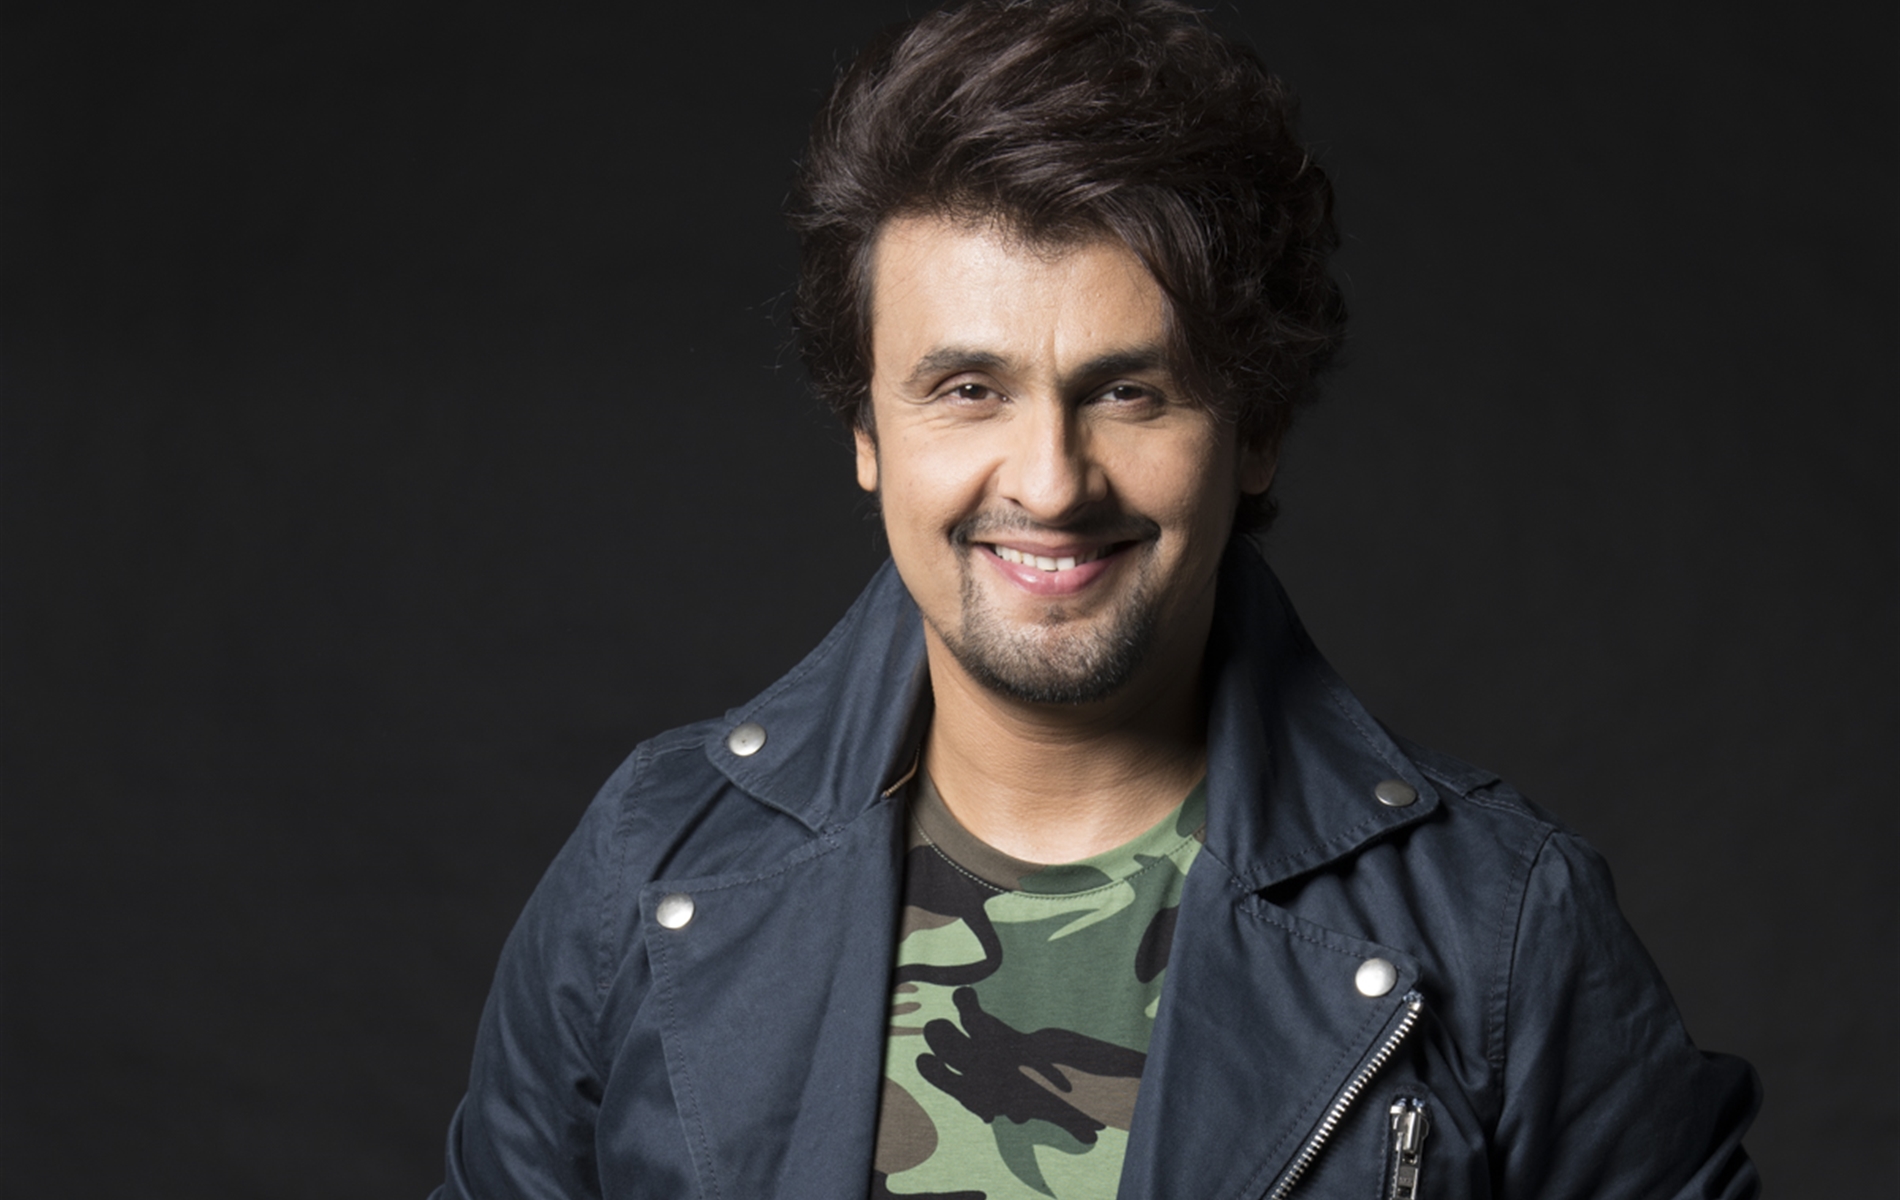 Indian Singer Sonu Nigam admitted in Norvic Hospital